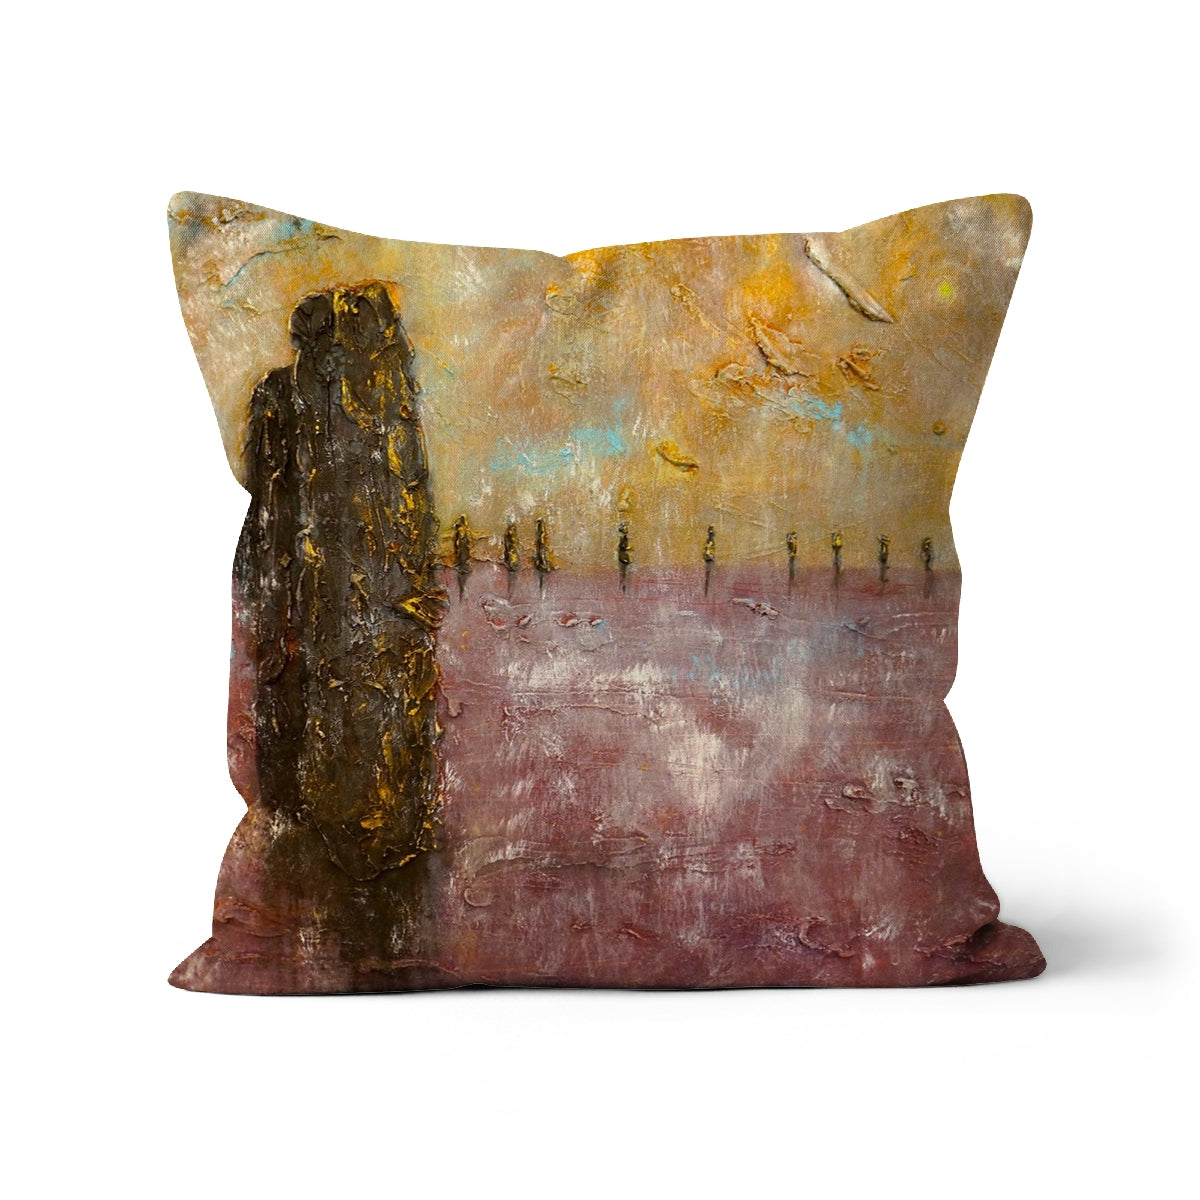 Brodgar Mist Orkney Art Gifts Cushion-Cushions-Orkney Art Gallery-Faux Suede-22"x22"-Paintings, Prints, Homeware, Art Gifts From Scotland By Scottish Artist Kevin Hunter